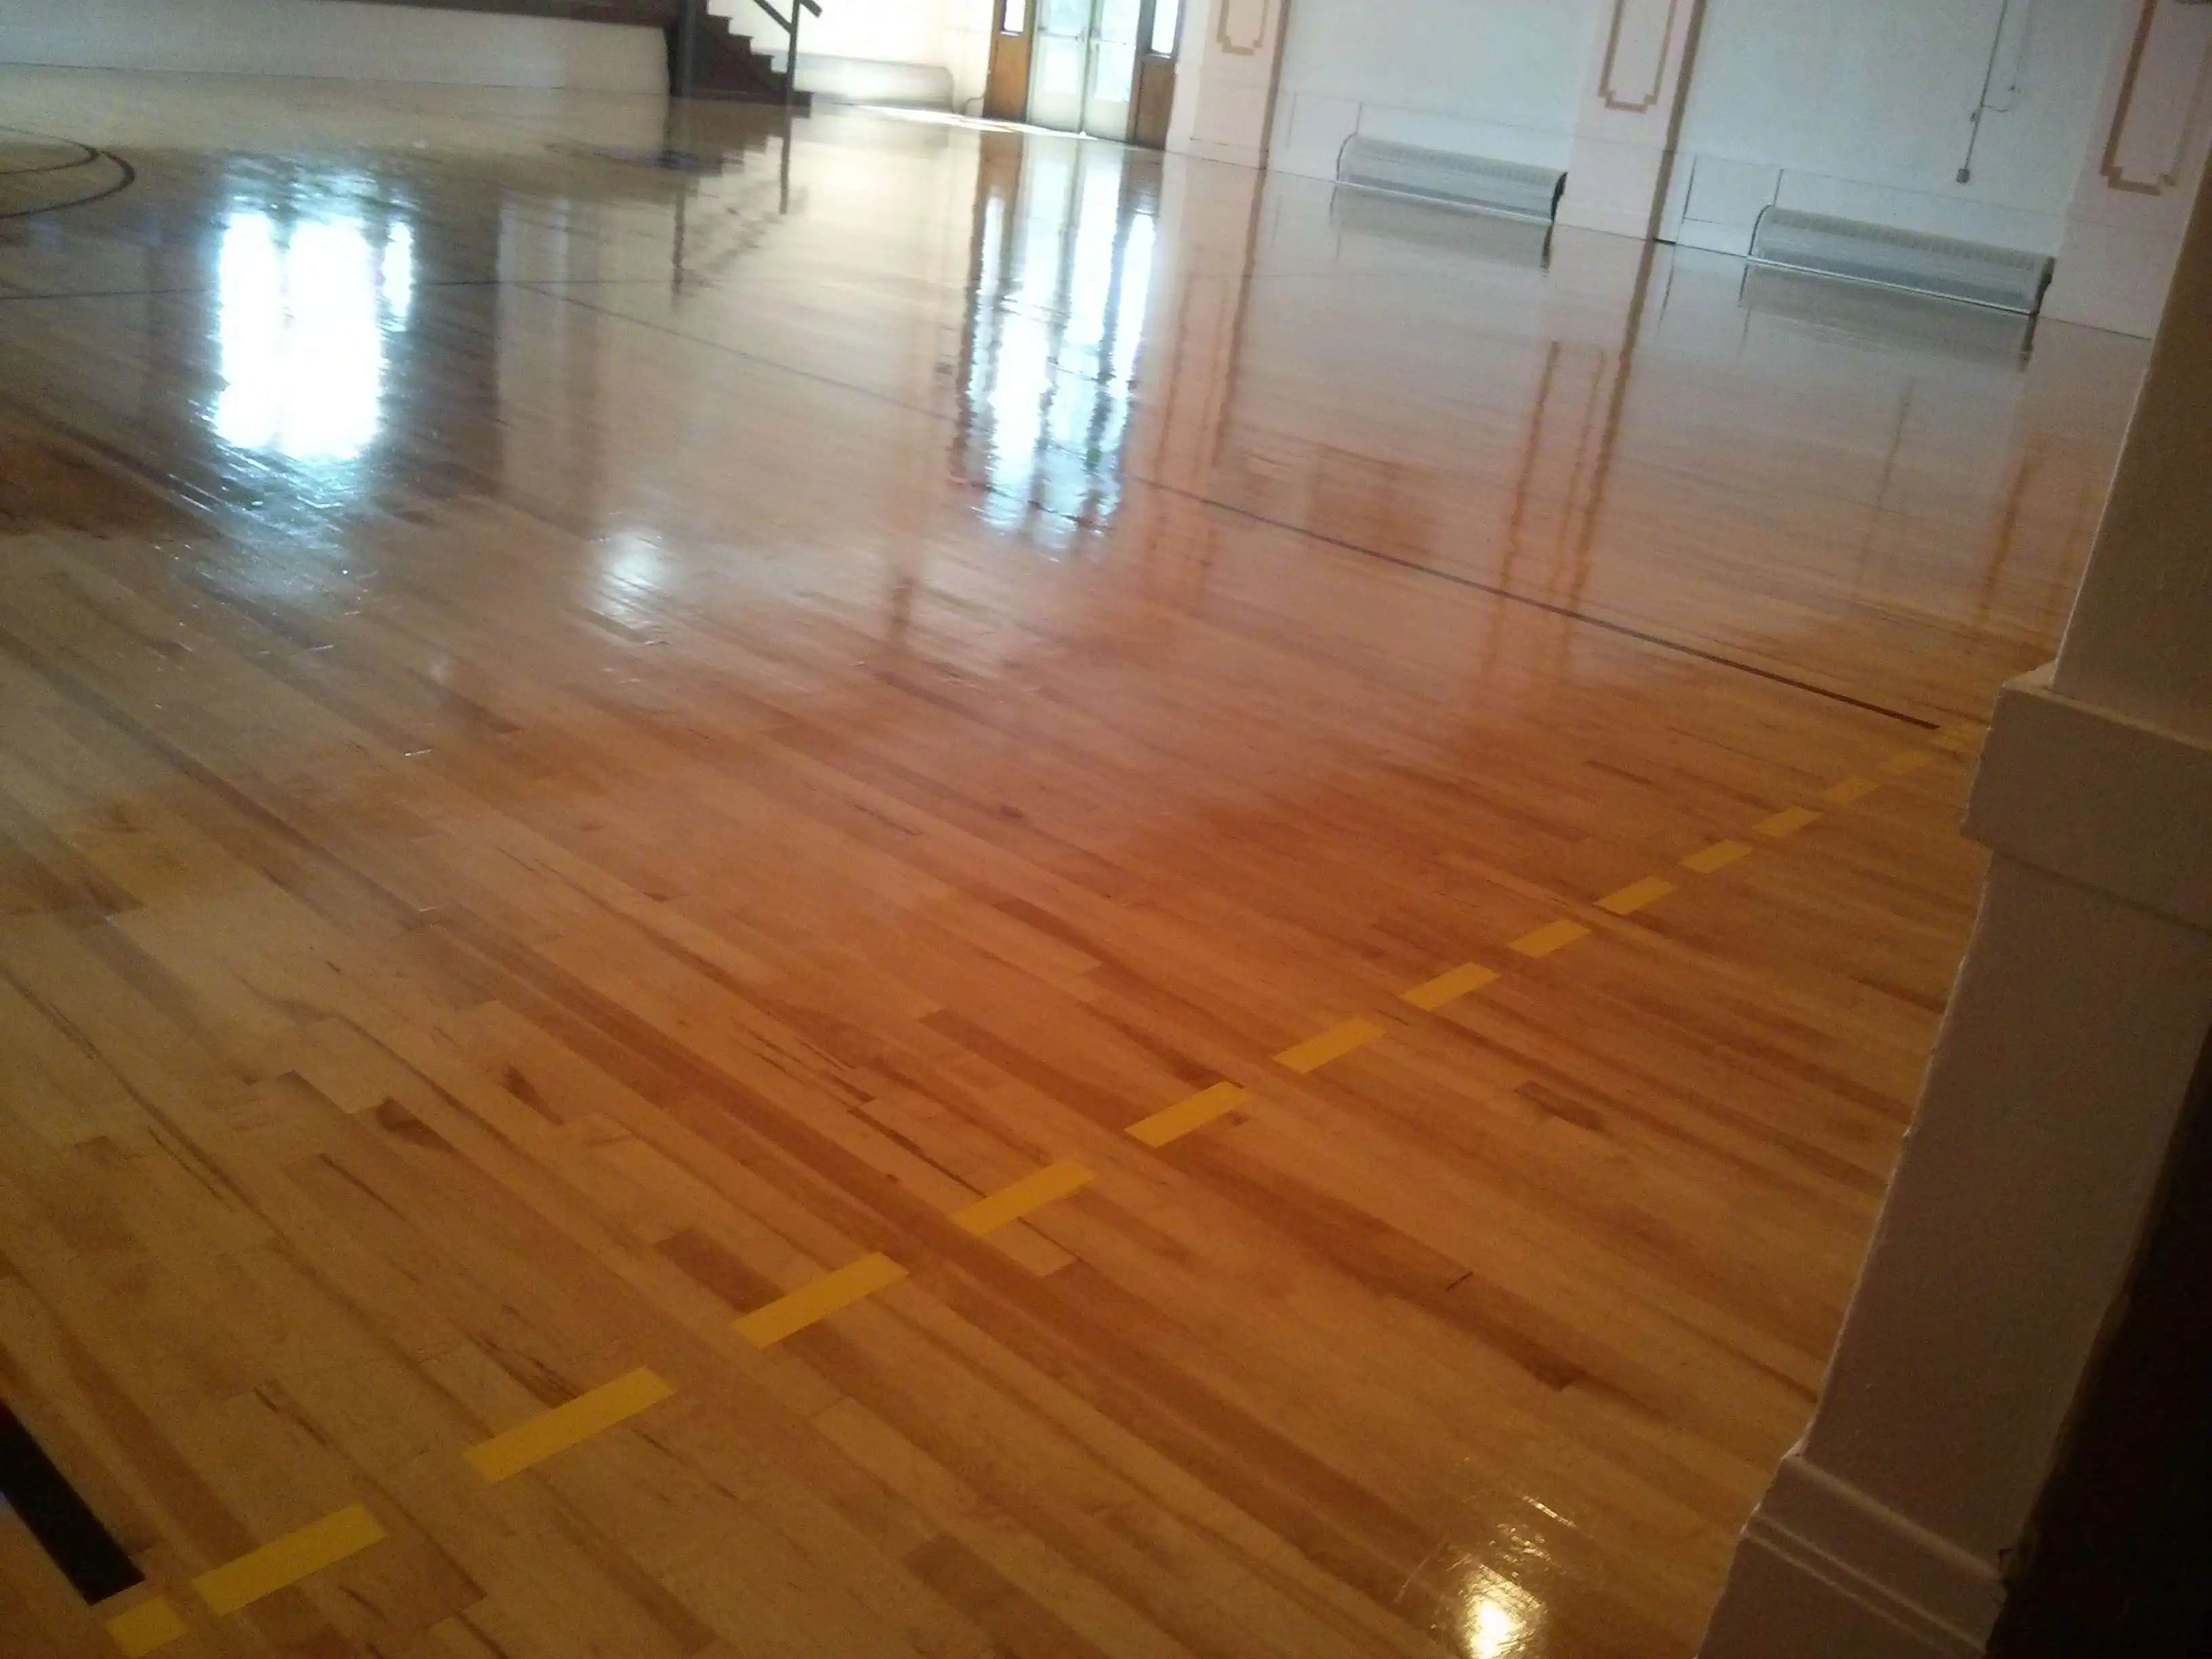 wood-gym-floor-scrub-and-clear-high-gloss-gym-coating-services-in-minneapolis-mn